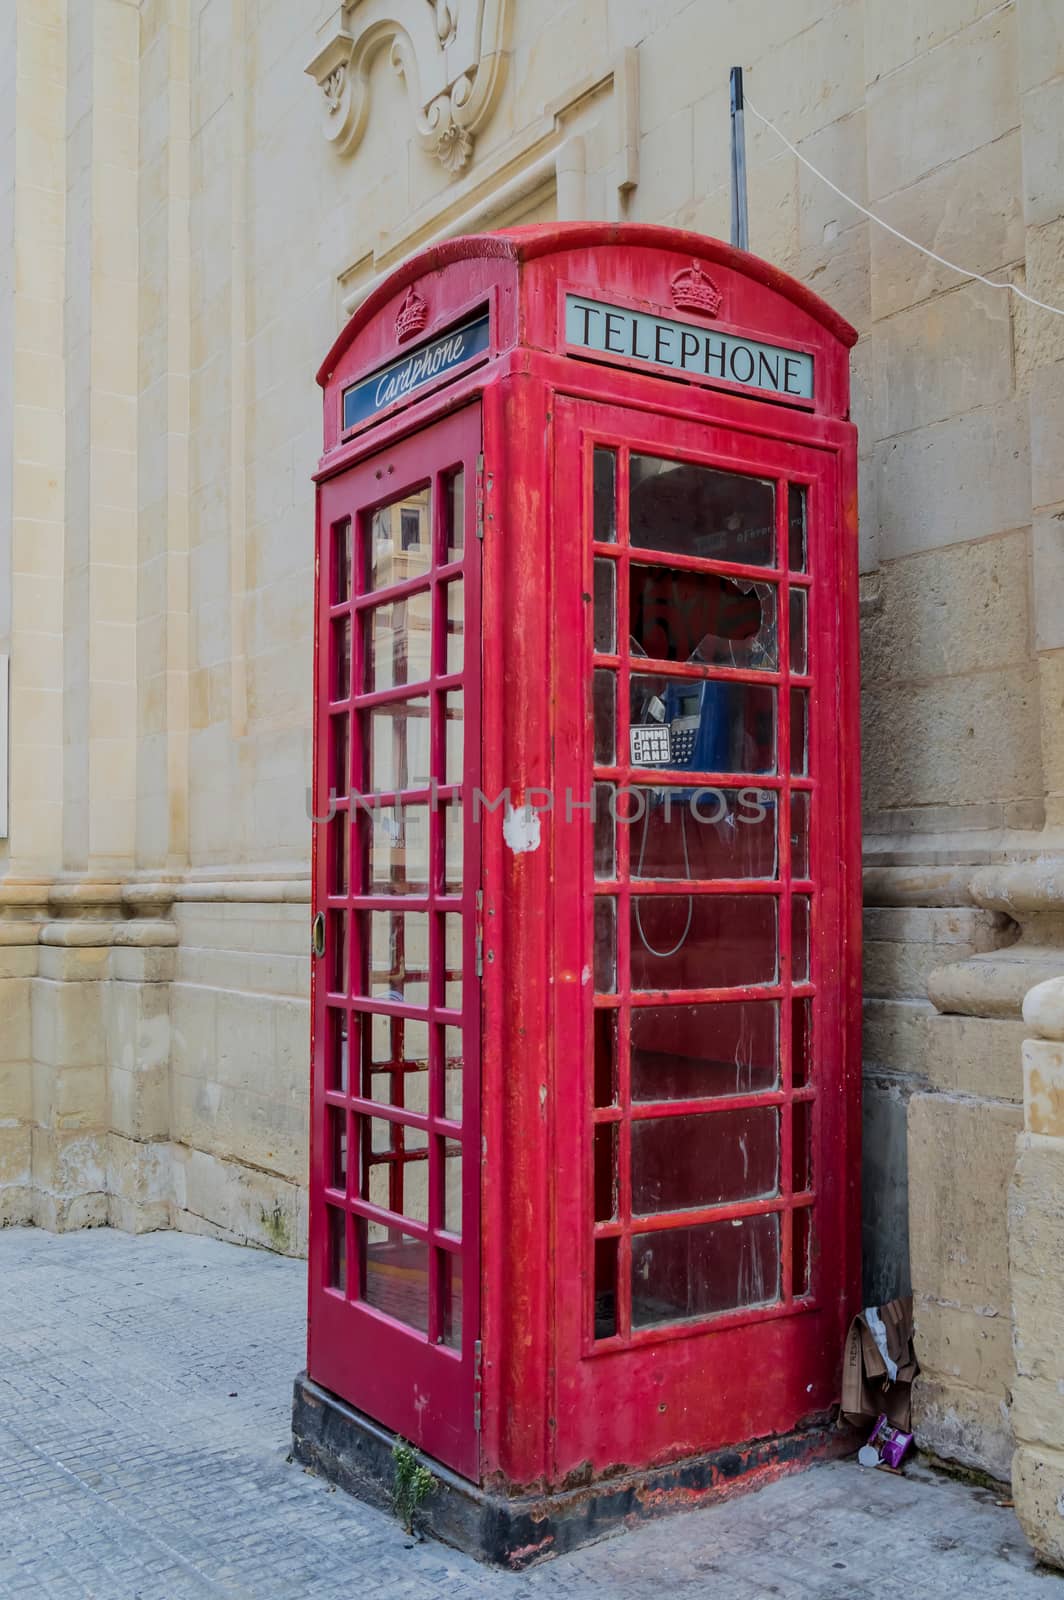 Telephone booth in the capital of Malta, Valletta